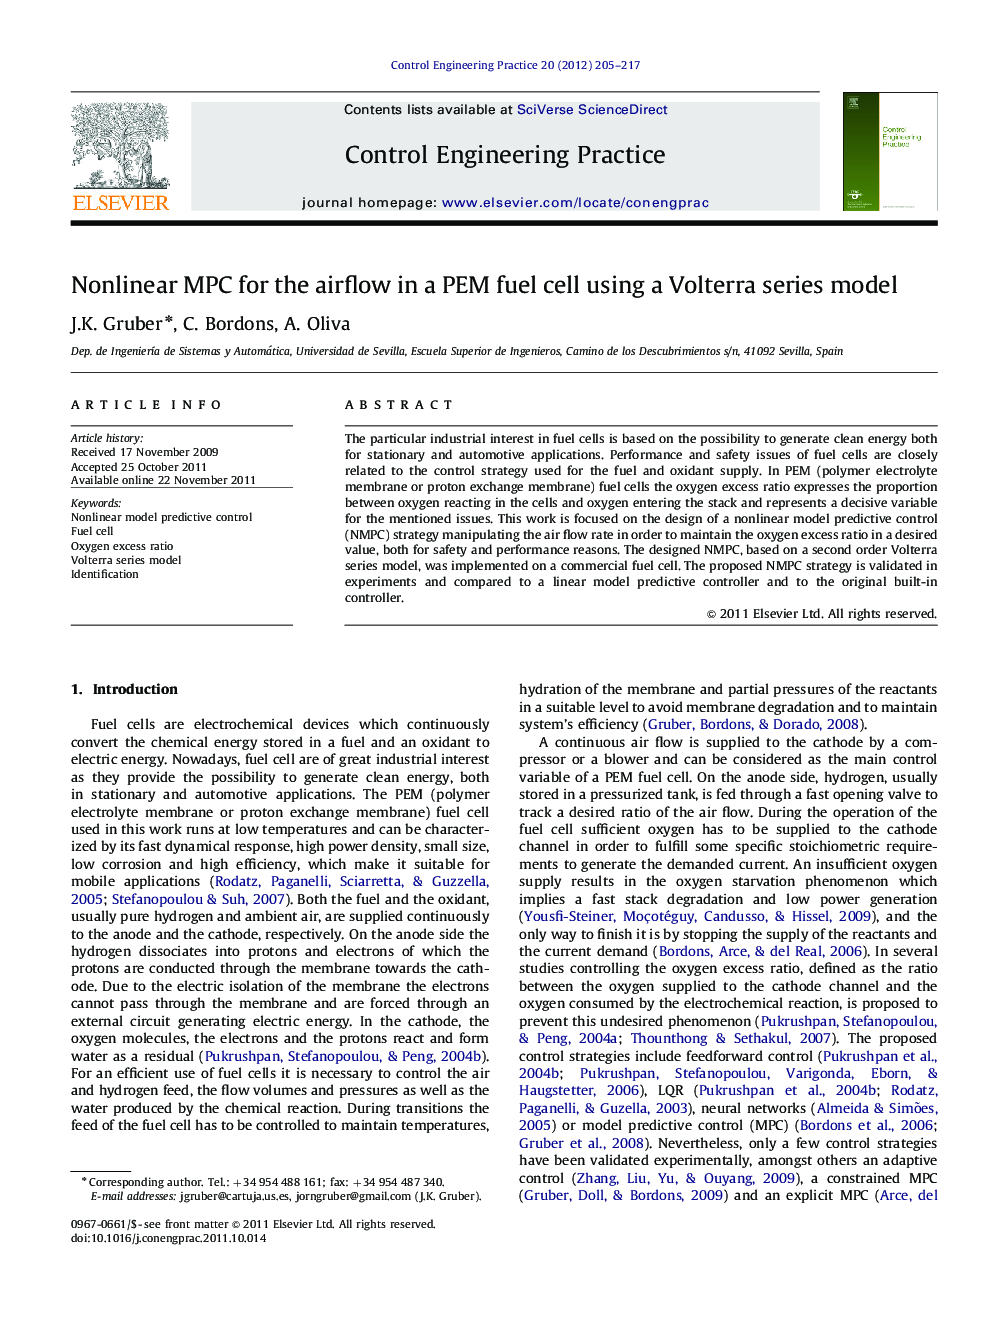 Nonlinear MPC for the airflow in a PEM fuel cell using a Volterra series model